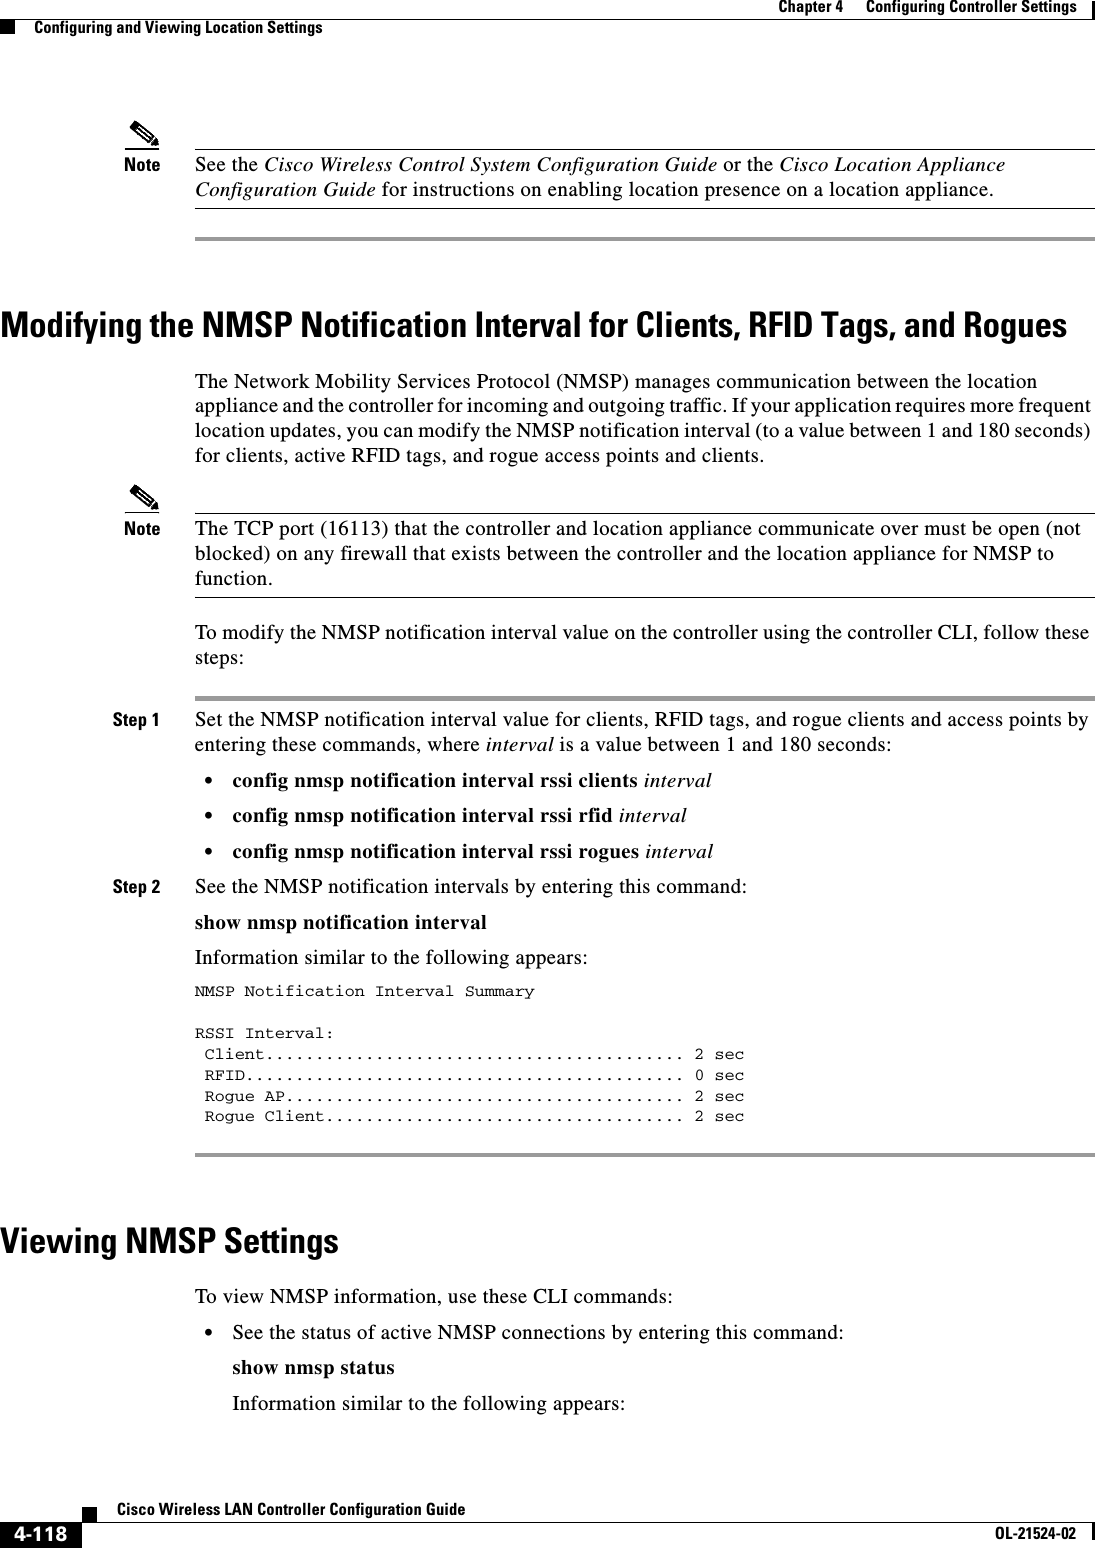  4-118Cisco Wireless LAN Controller Configuration GuideOL-21524-02Chapter 4      Configuring Controller SettingsConfiguring and Viewing Location SettingsNote See the Cisco Wireless Control System Configuration Guide or the Cisco Location Appliance Configuration Guide for instructions on enabling location presence on a location appliance.Modifying the NMSP Notification Interval for Clients, RFID Tags, and RoguesThe Network Mobility Services Protocol (NMSP) manages communication between the location appliance and the controller for incoming and outgoing traffic. If your application requires more frequent location updates, you can modify the NMSP notification interval (to a value between 1 and 180 seconds) for clients, active RFID tags, and rogue access points and clients.Note The TCP port (16113) that the controller and location appliance communicate over must be open (not blocked) on any firewall that exists between the controller and the location appliance for NMSP to function.To modify the NMSP notification interval value on the controller using the controller CLI, follow these steps:Step 1 Set the NMSP notification interval value for clients, RFID tags, and rogue clients and access points by entering these commands, where interval is a value between 1 and 180 seconds:  • config nmsp notification interval rssi clients interval  • config nmsp notification interval rssi rfid interval  • config nmsp notification interval rssi rogues intervalStep 2 See the NMSP notification intervals by entering this command:show nmsp notification intervalInformation similar to the following appears:NMSP Notification Interval SummaryRSSI Interval: Client.......................................... 2 sec RFID............................................ 0 sec Rogue AP........................................ 2 sec Rogue Client.................................... 2 secViewing NMSP SettingsTo view NMSP information, use these CLI commands:  • See the status of active NMSP connections by entering this command:show nmsp statusInformation similar to the following appears: